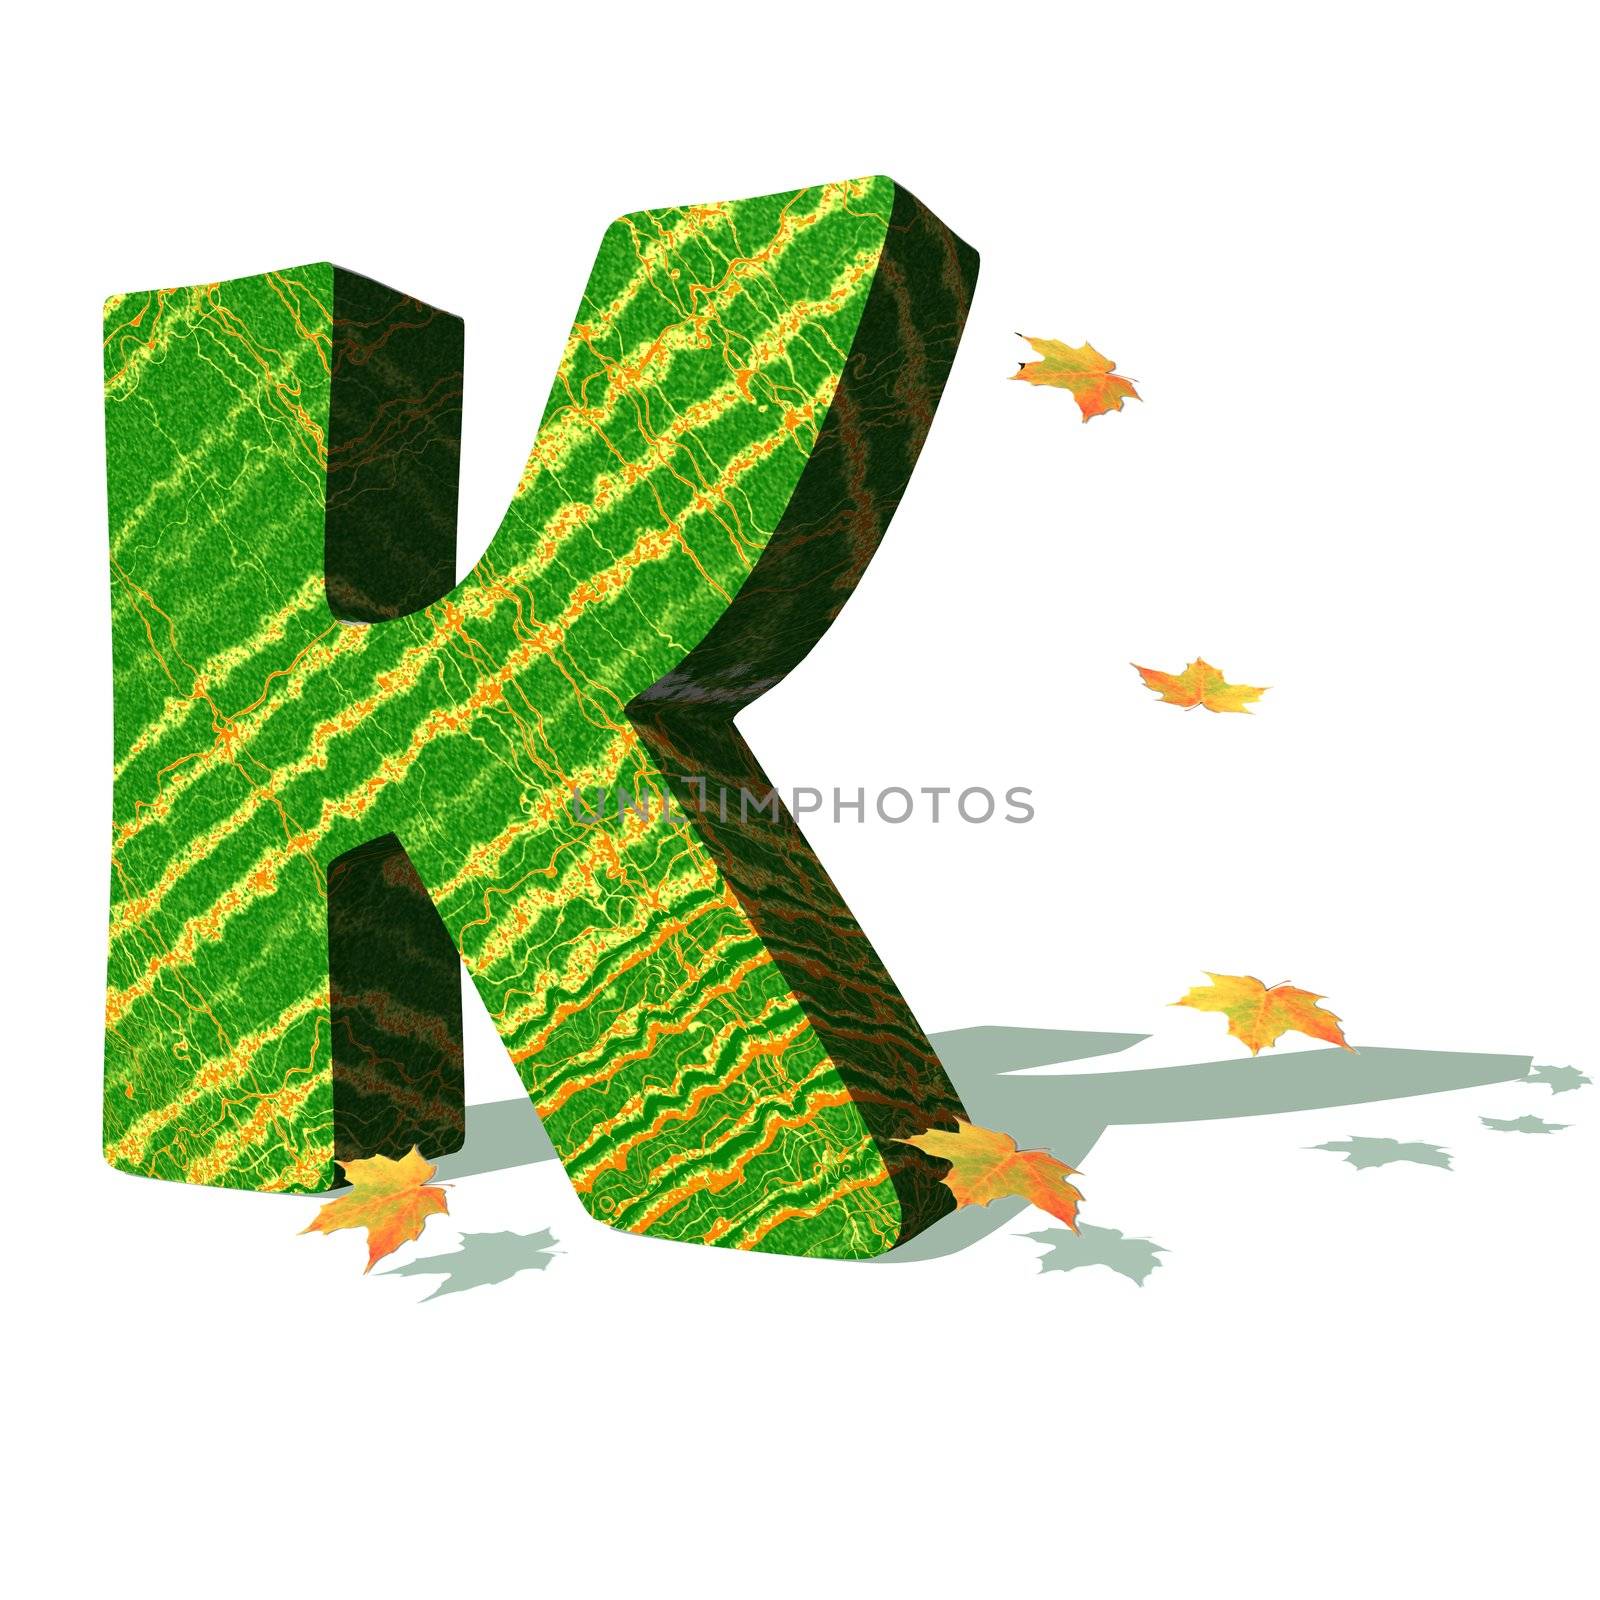 Green ecological K capital letter surrounded by few autumn falling leaves in a white background with shadows